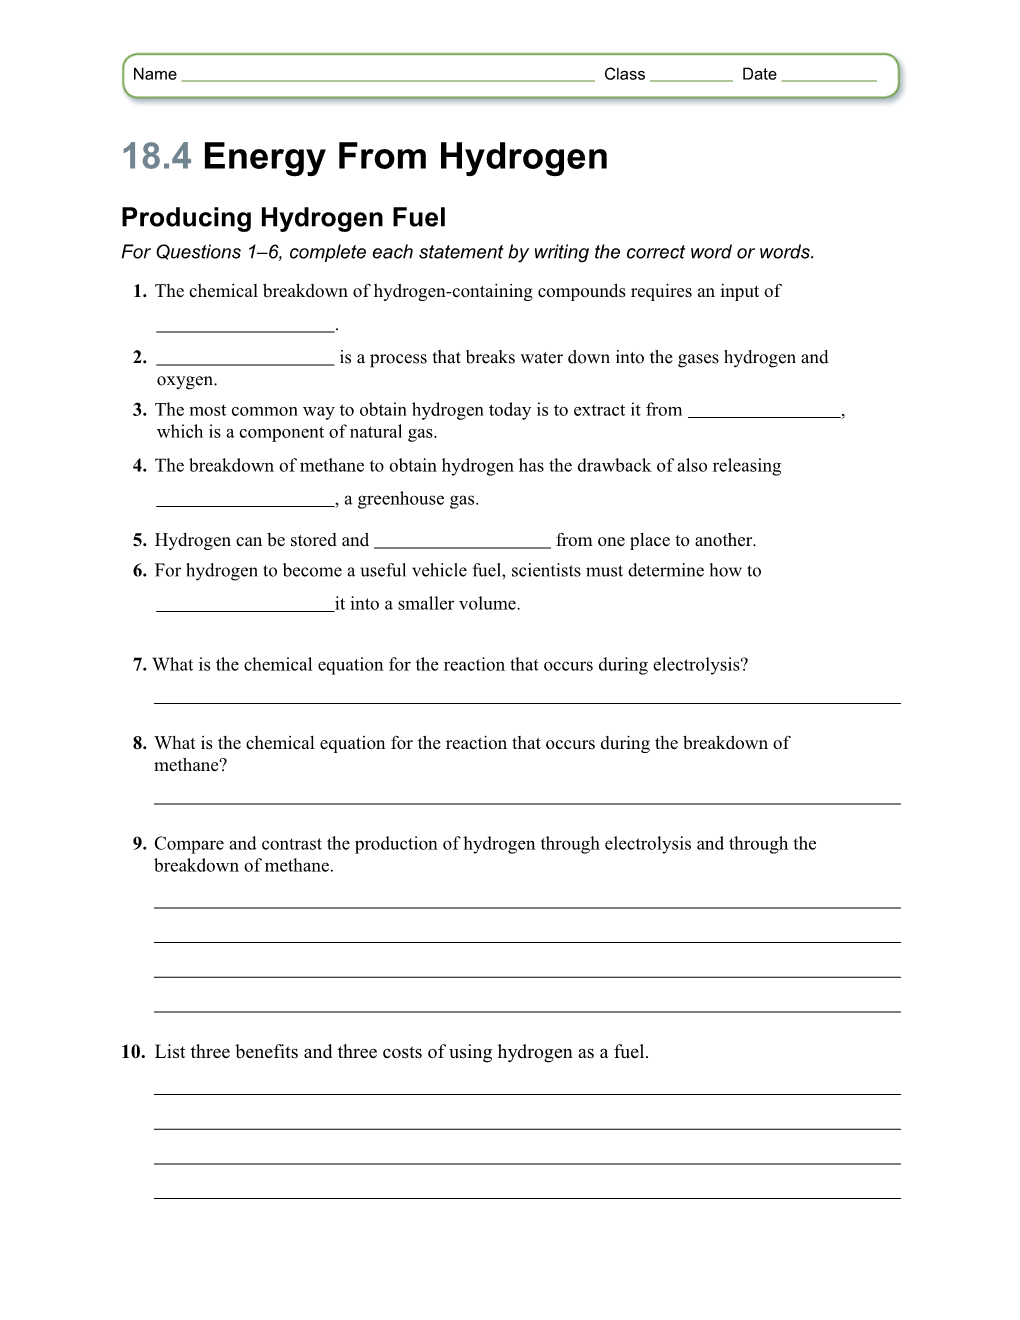 18.4 Energy from Hydrogen